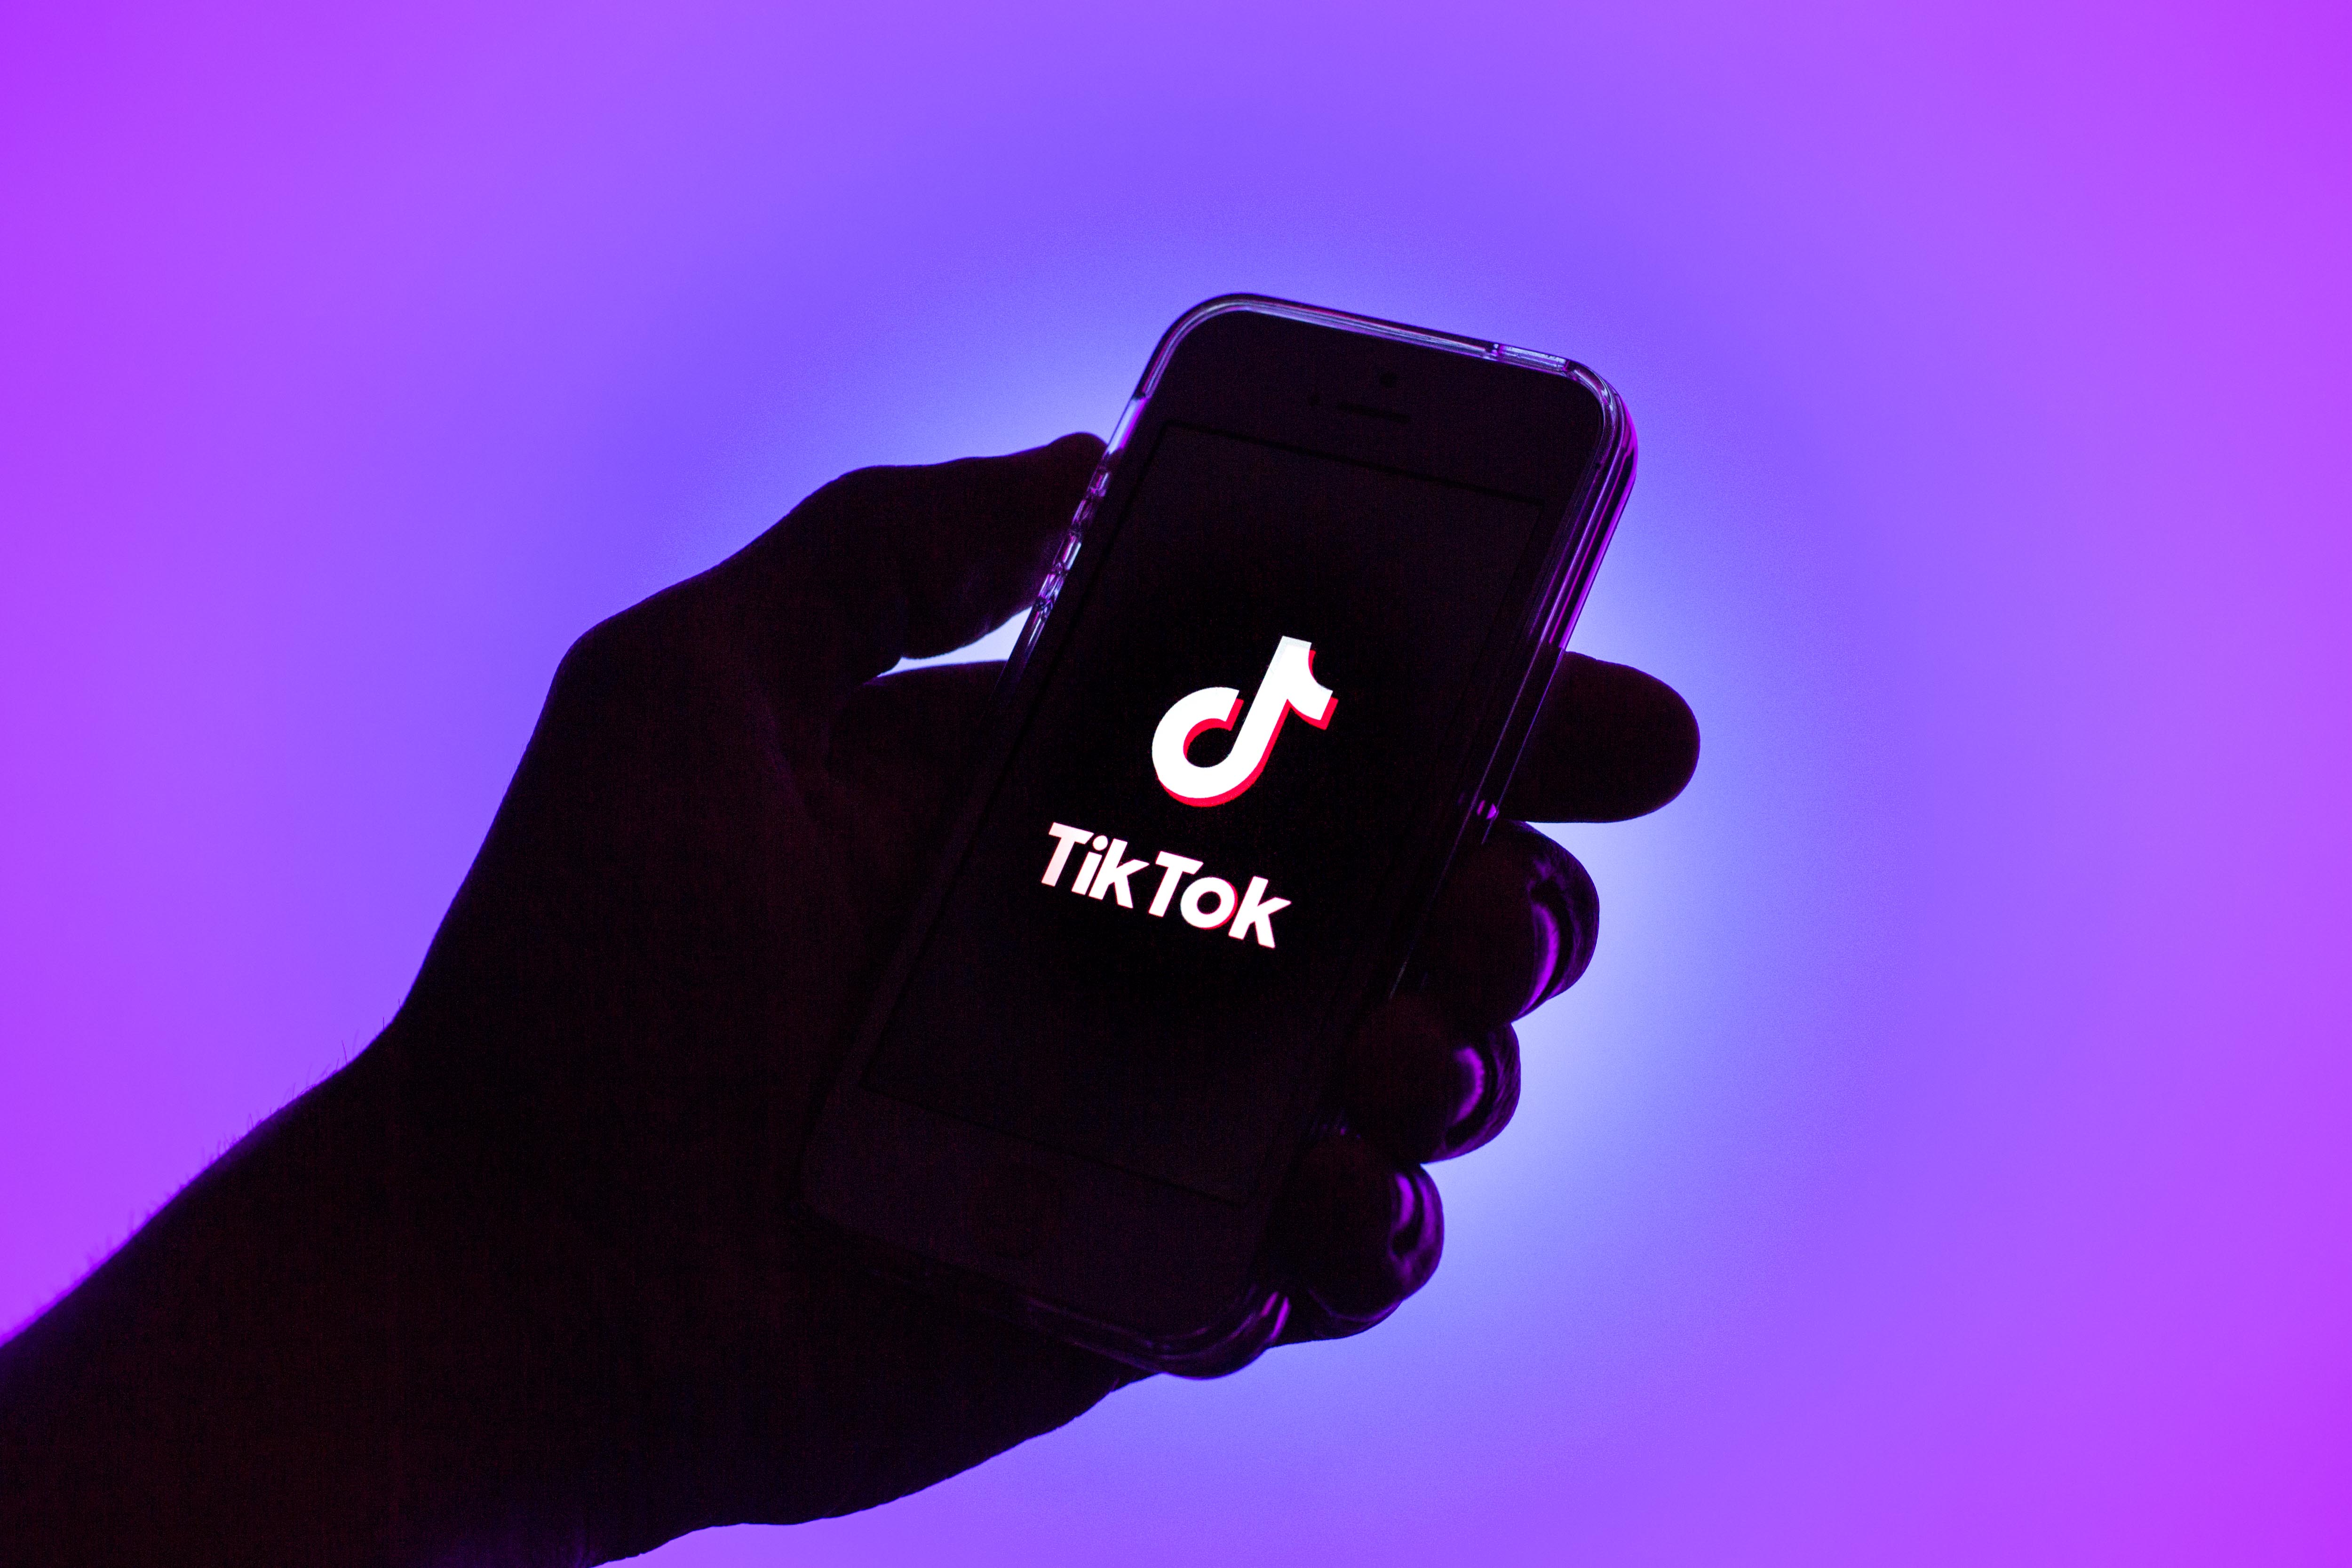 The US government ramps up its pressure campaign against TikTok